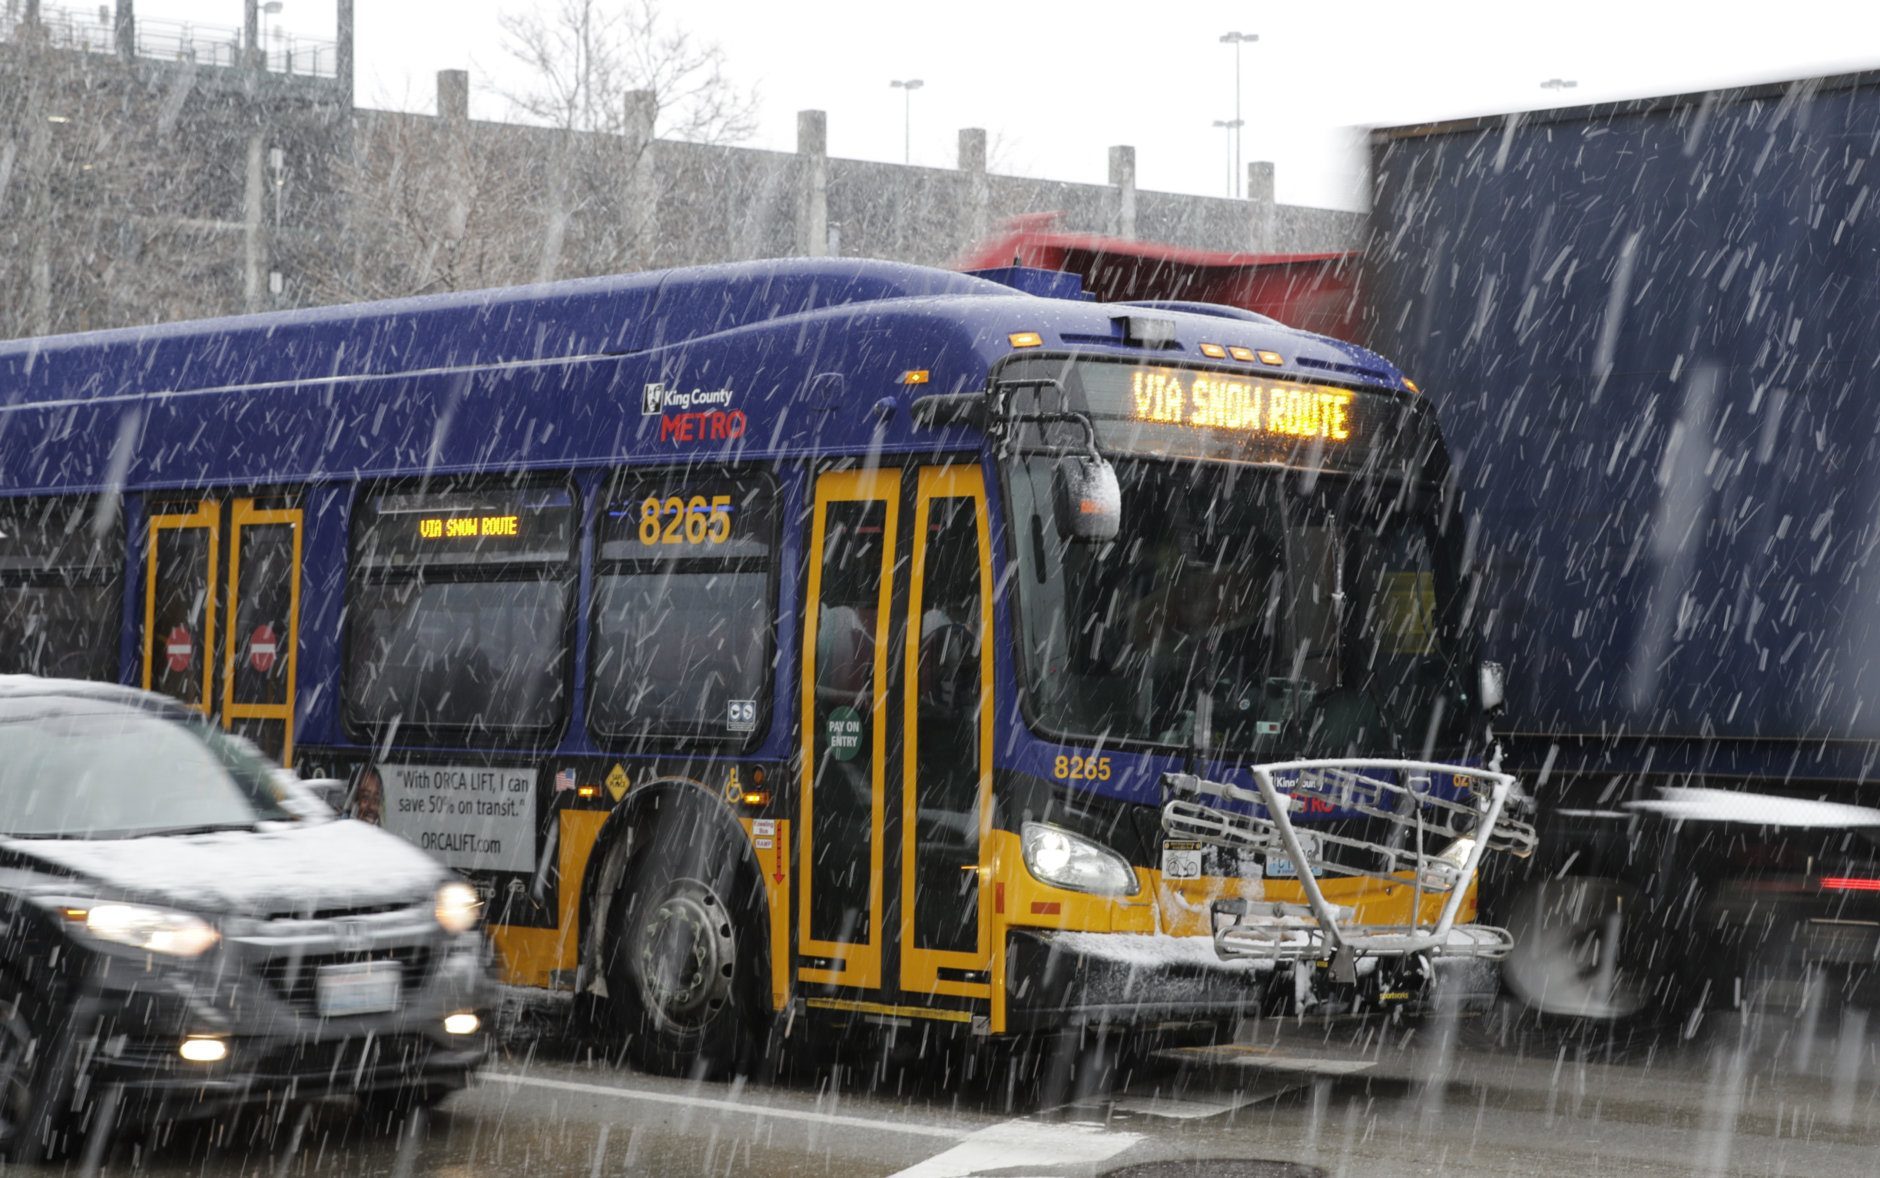 A King County Metro bus displays a snow route sign, Monday, Feb. 11, 2019, in Seattle. Schools were closed across Washington state as winter snowstorms continued pummeling the Northwest. Seattle's metro area has already been hit by three snowstorms in February, making it the snowiest month in Seattle in more than 30 years. (AP Photo/Ted S. Warren)